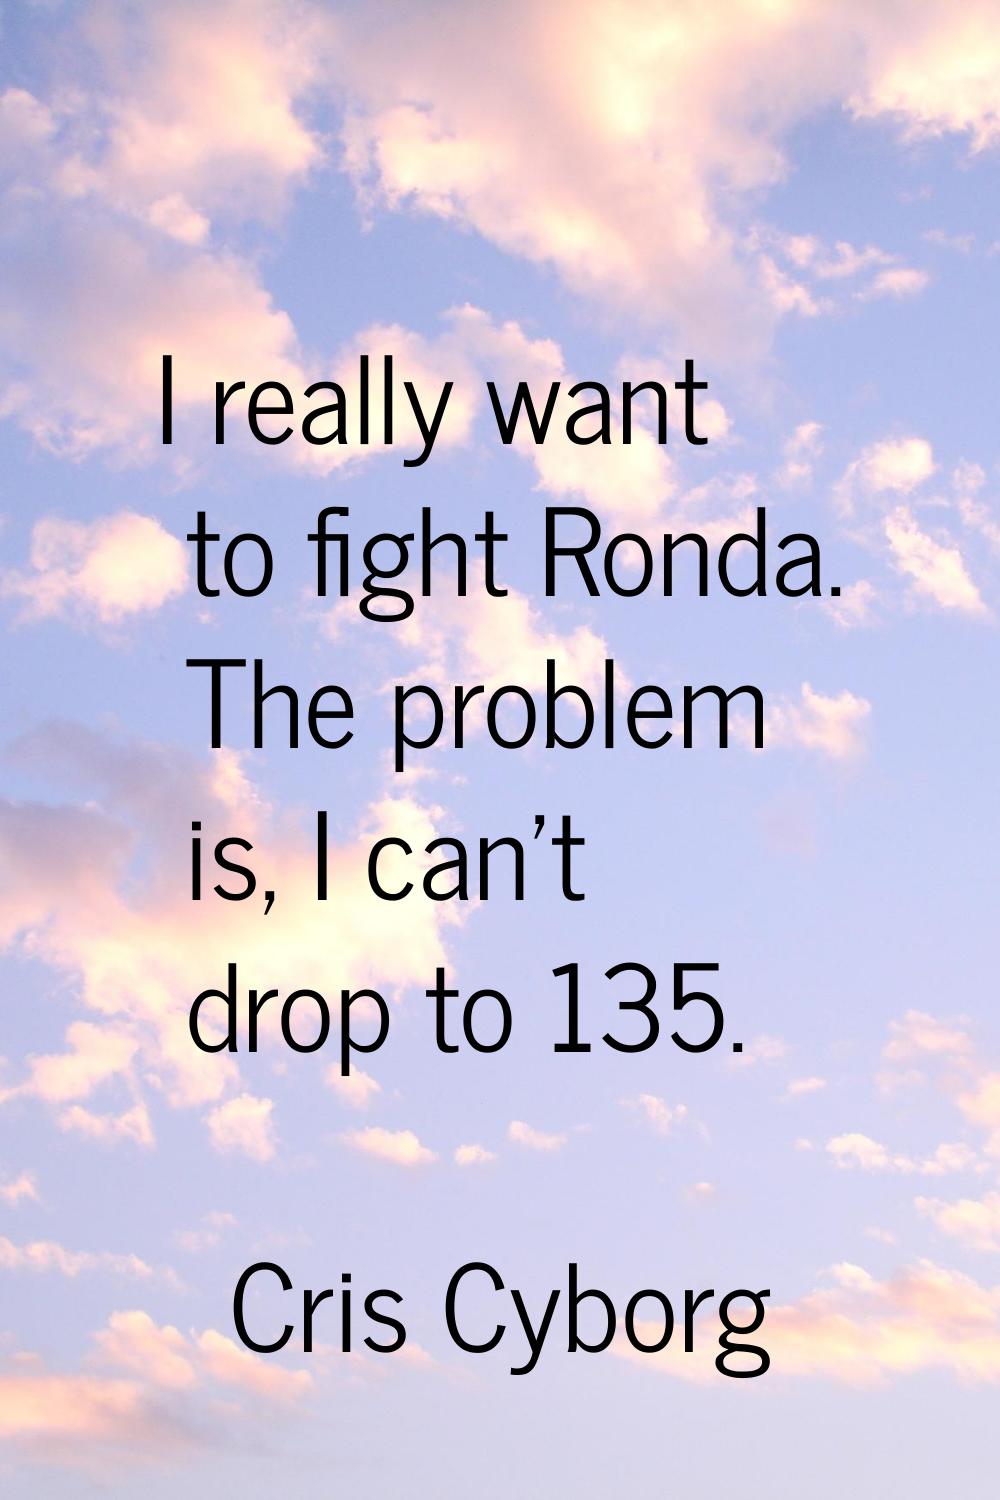 I really want to fight Ronda. The problem is, I can't drop to 135.